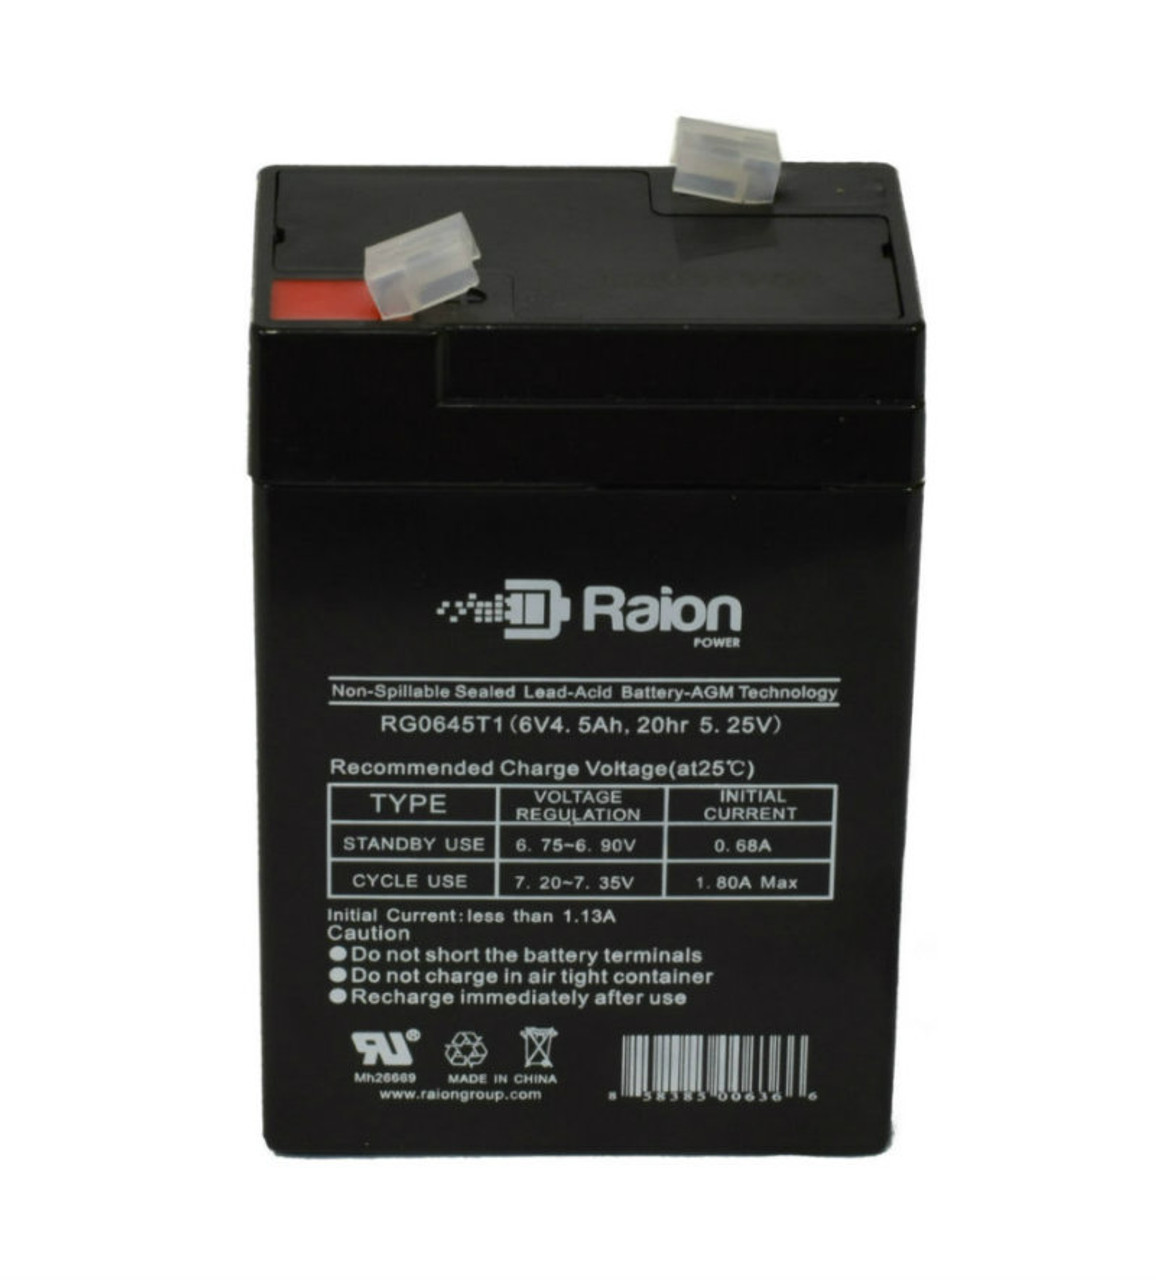 Raion Power RG0645T1 Replacement Battery Cartridge for SBB 3FM4